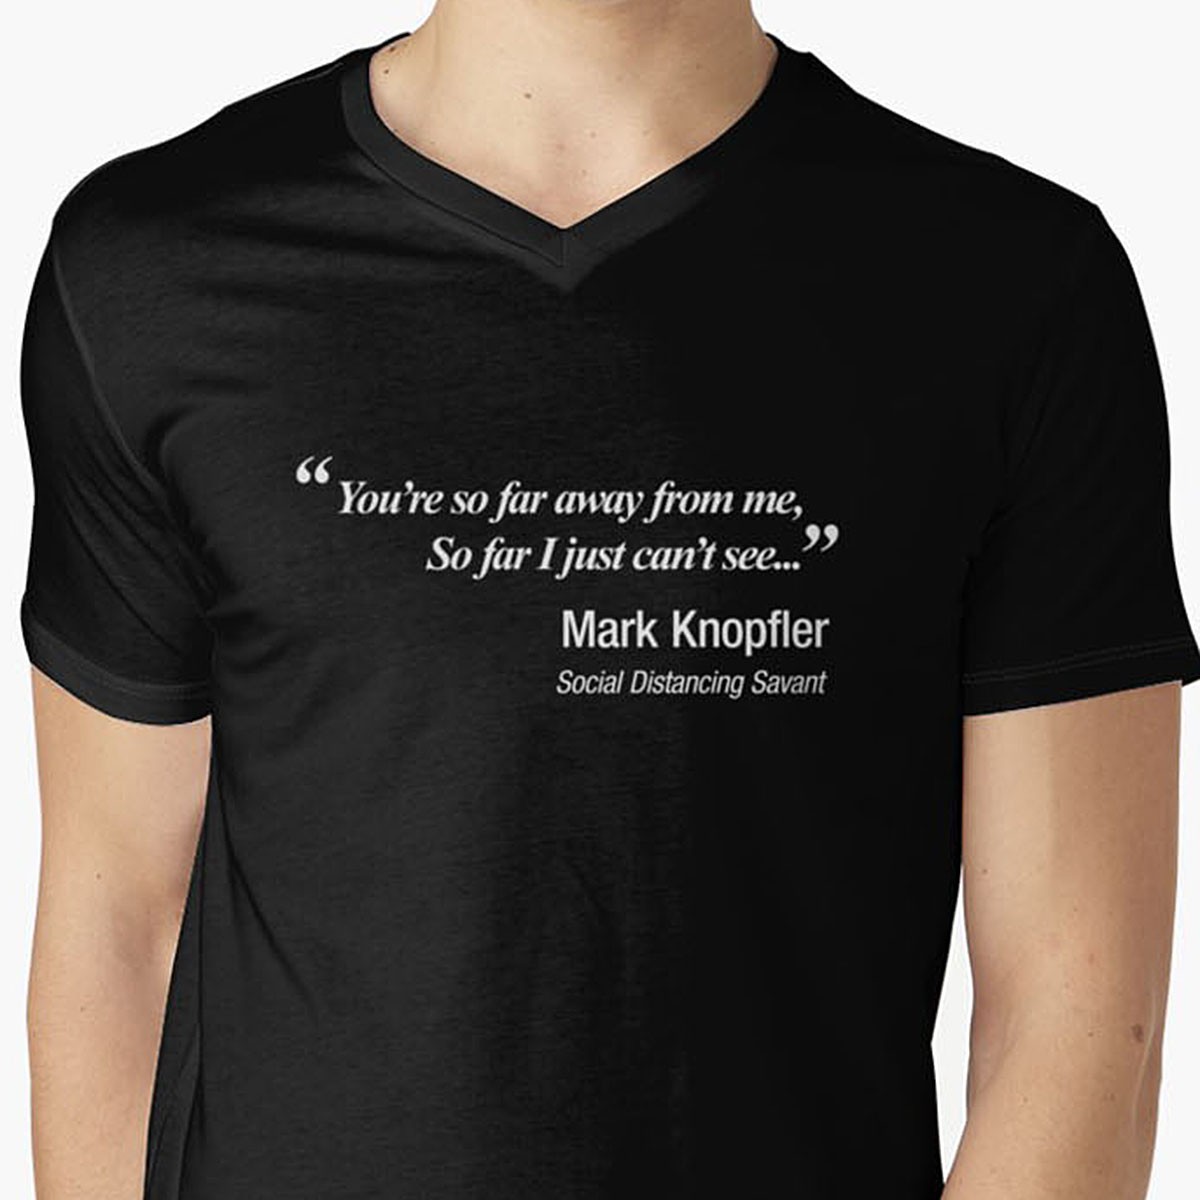 You're so far away from me - Dire Straits/ Mark Knopfler Parody V-Neck T-Shirt by NTK Apparel